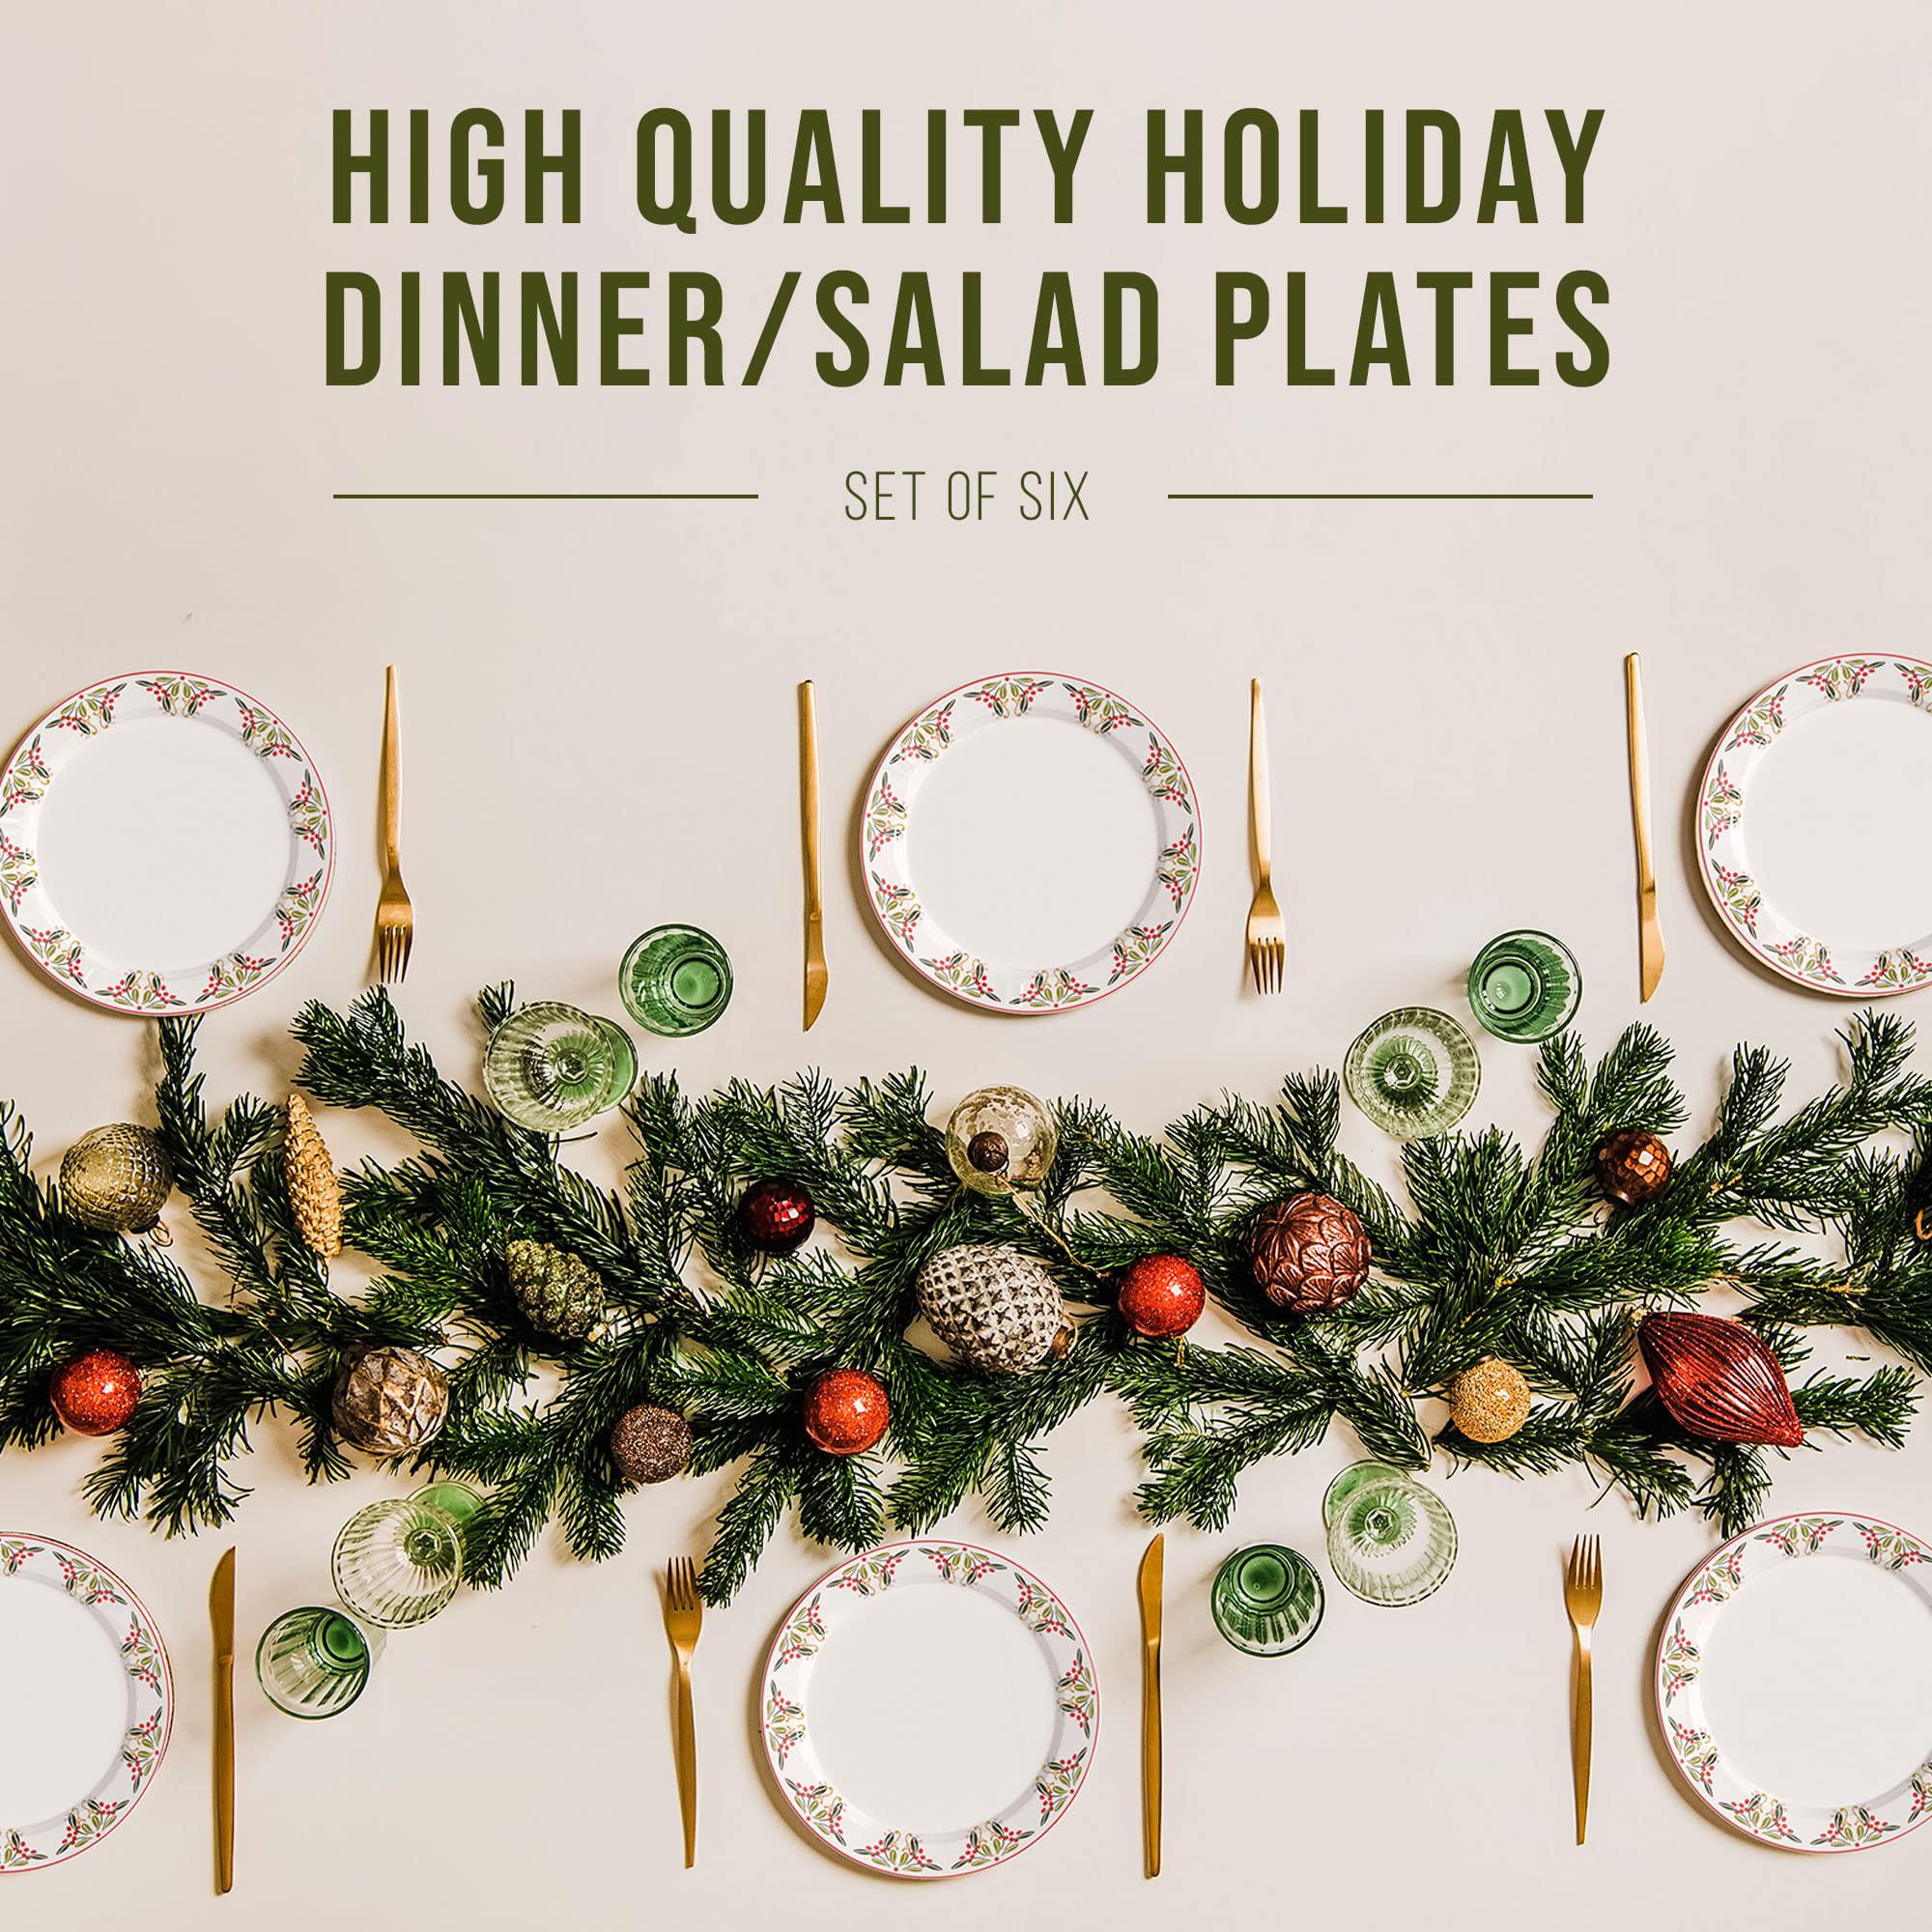 american atelier bargello plates | set of 6 | holiday themed dishes | mistletoe and holly berry | dinner/salad plates | made 